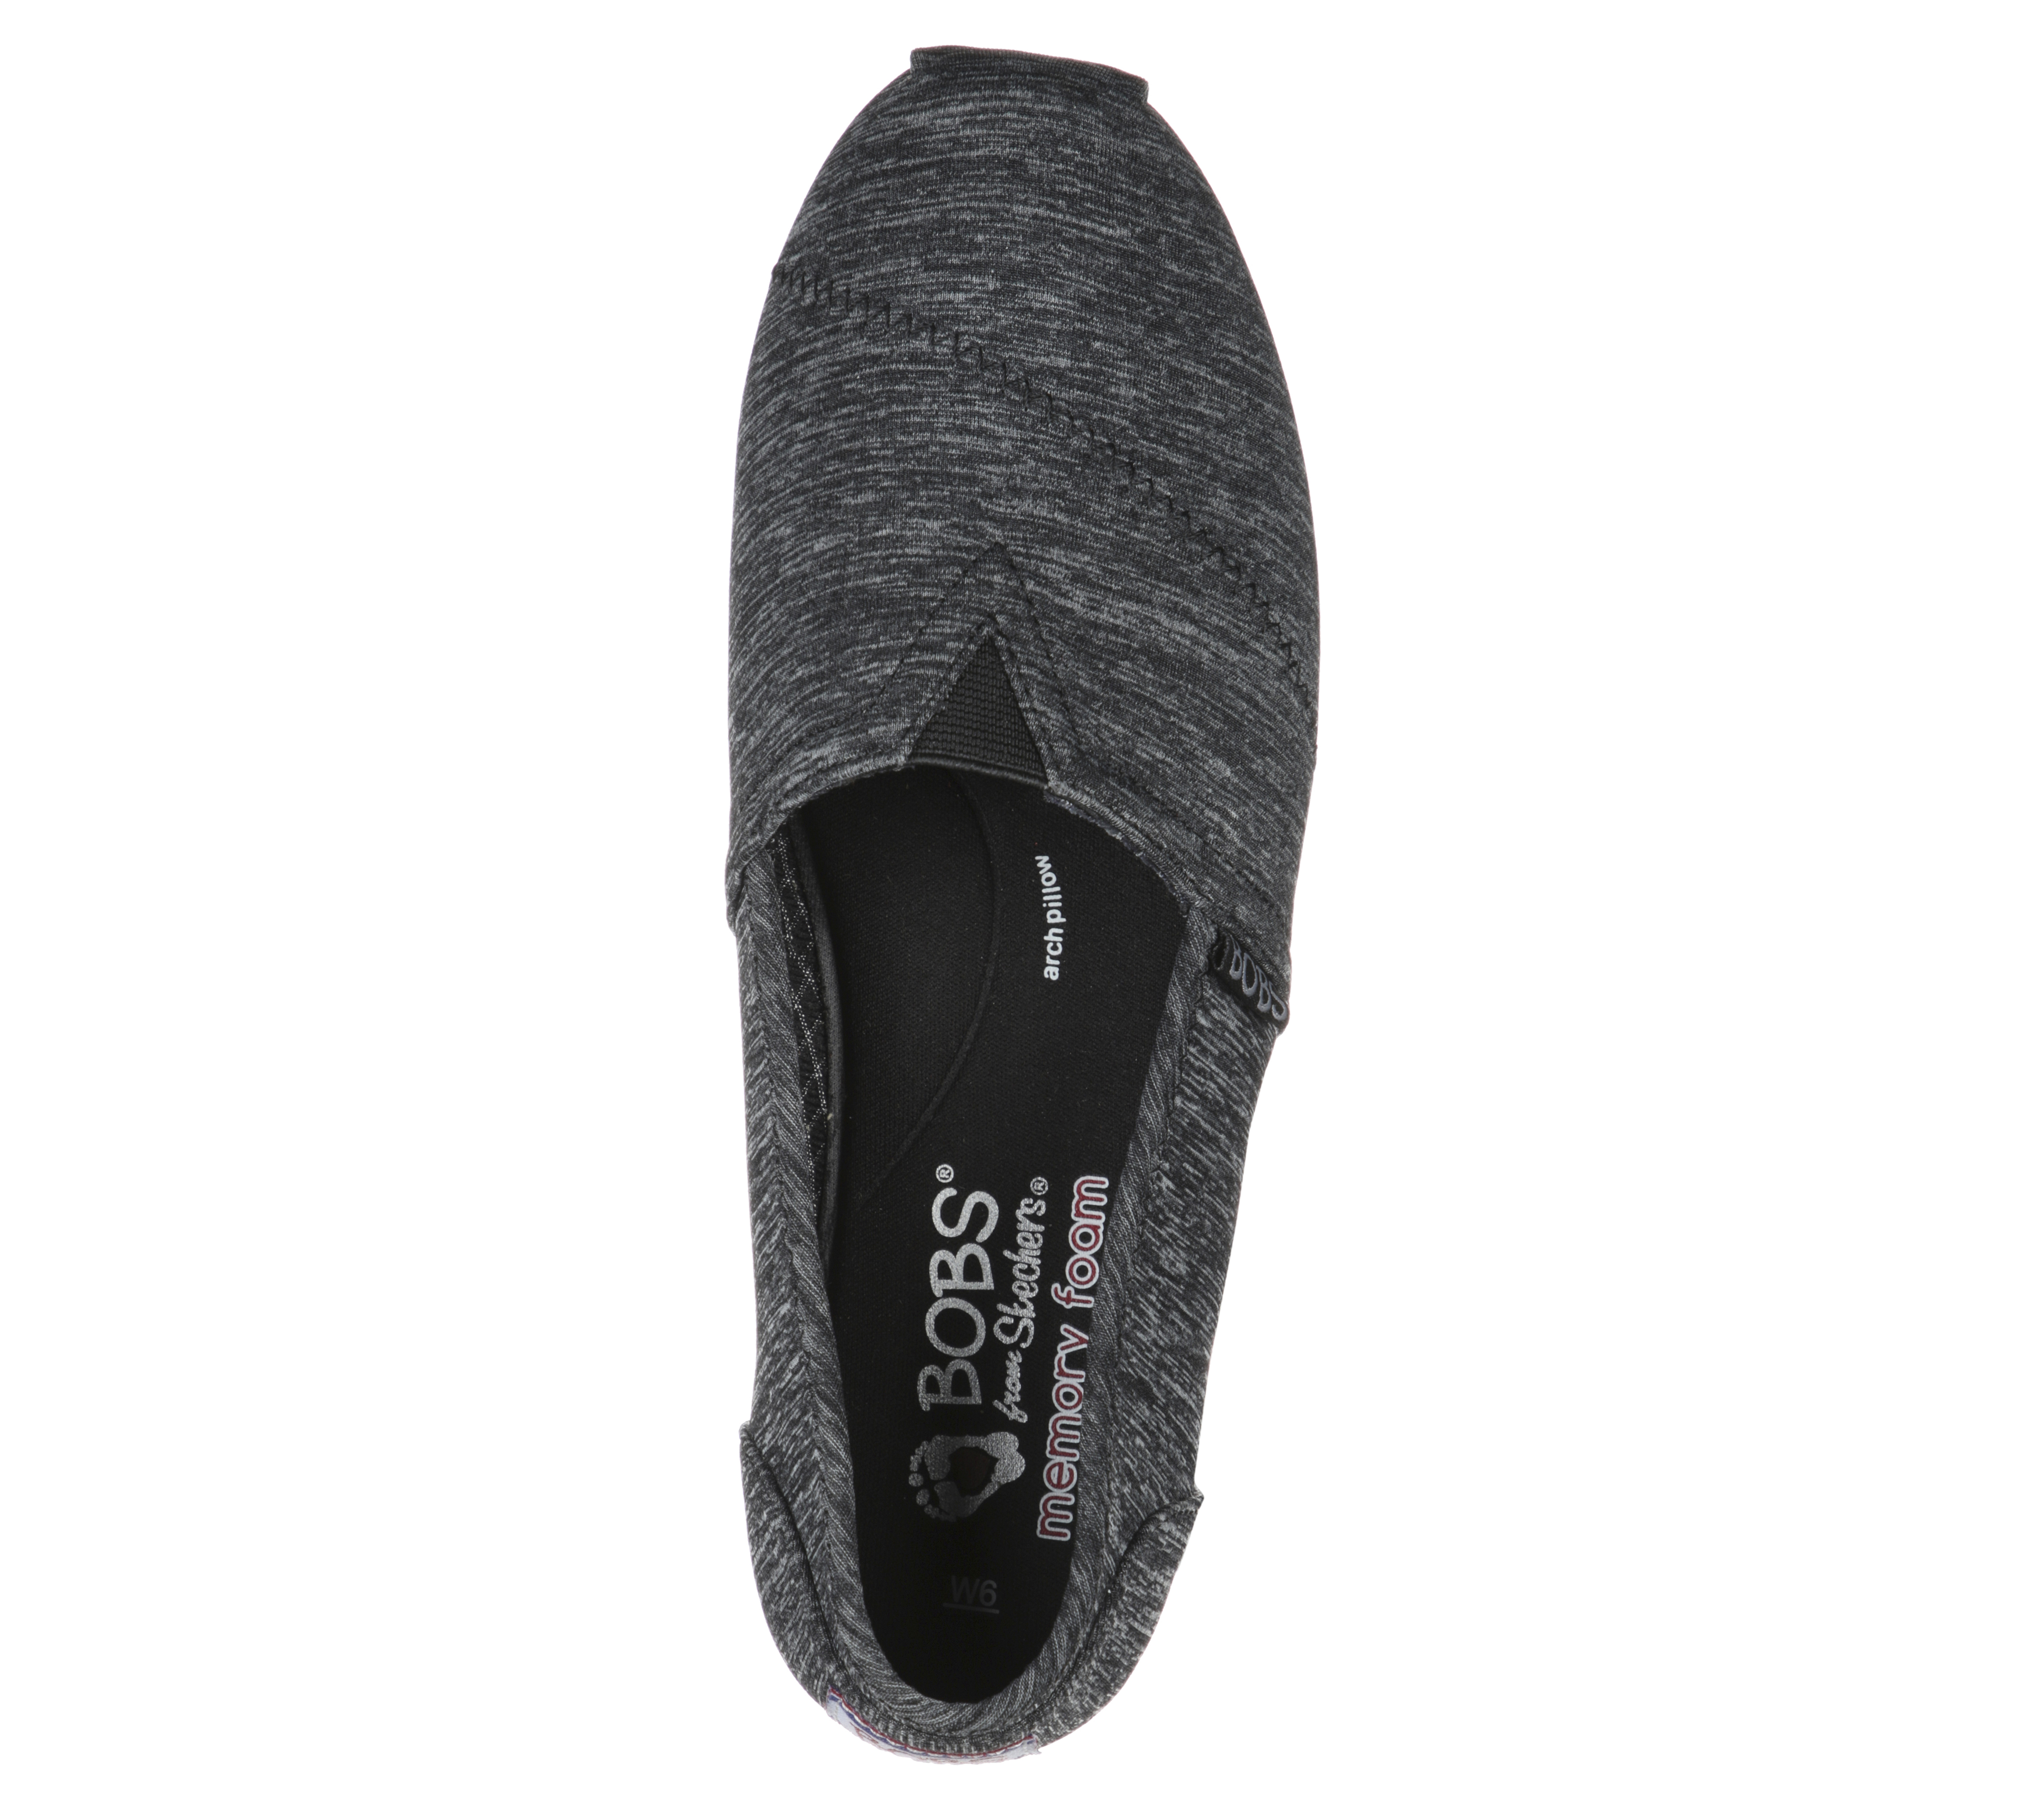 skechers bobs express yourself